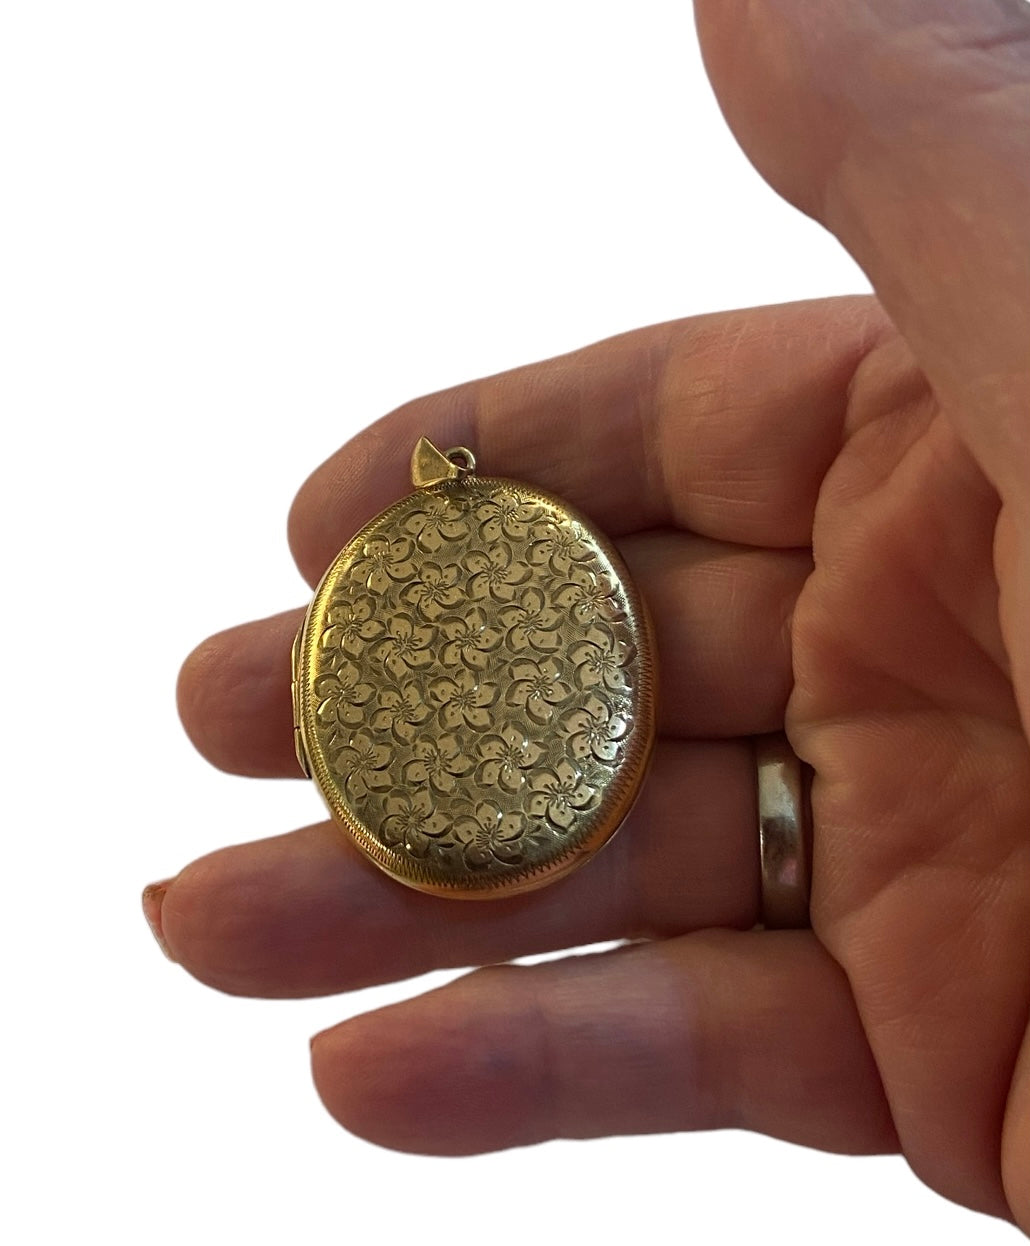 9ct very Large locket. 'with pansies etched on the front. 12.3g "pense a moi' circa 1966